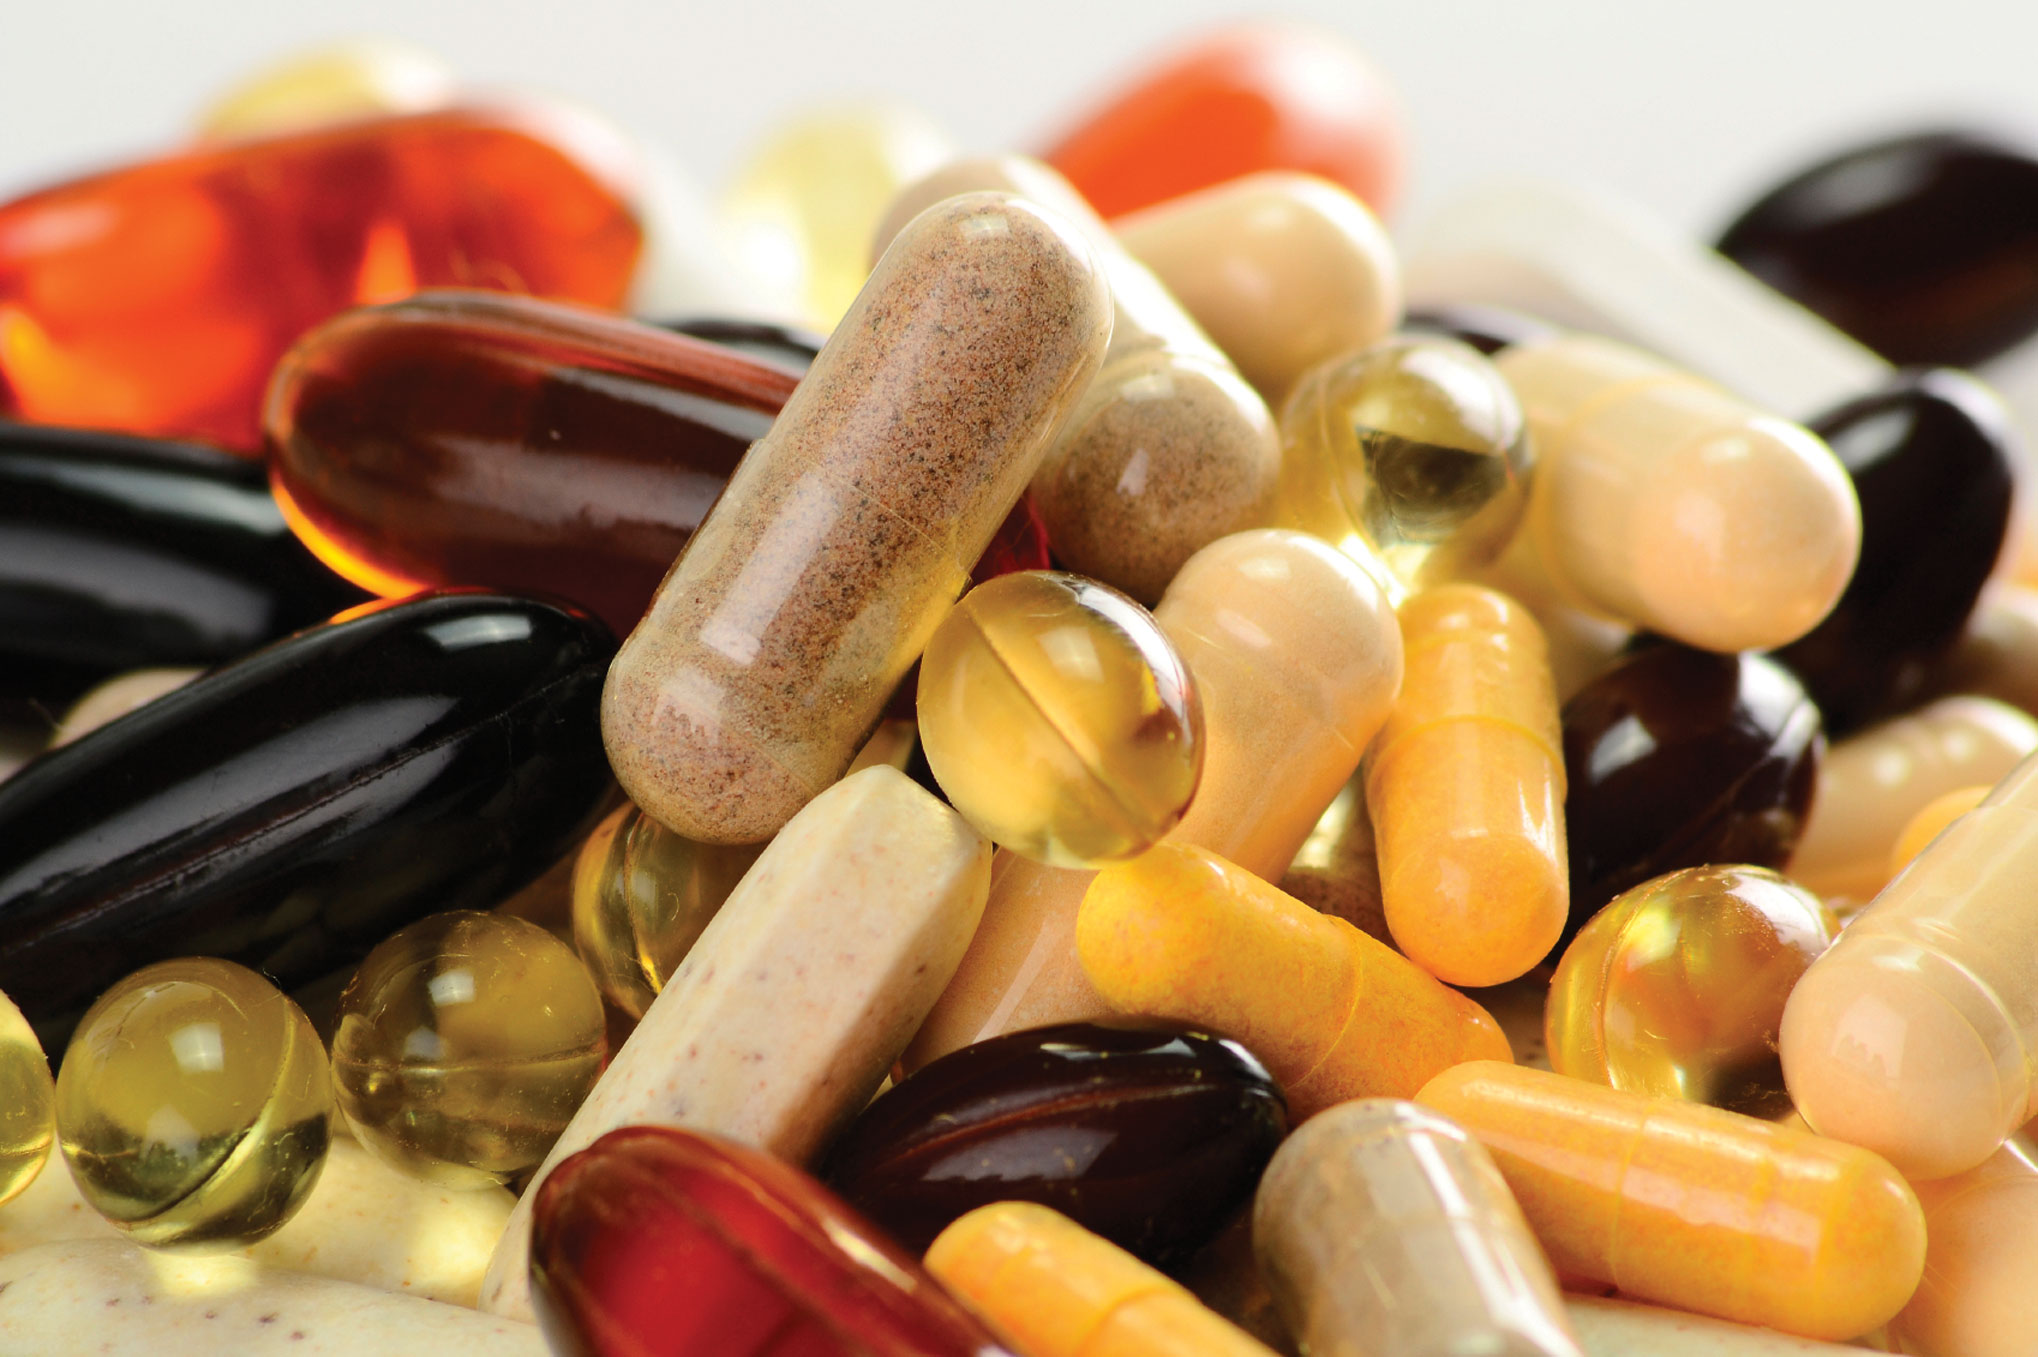 Are Your Vitamins Lying to You?